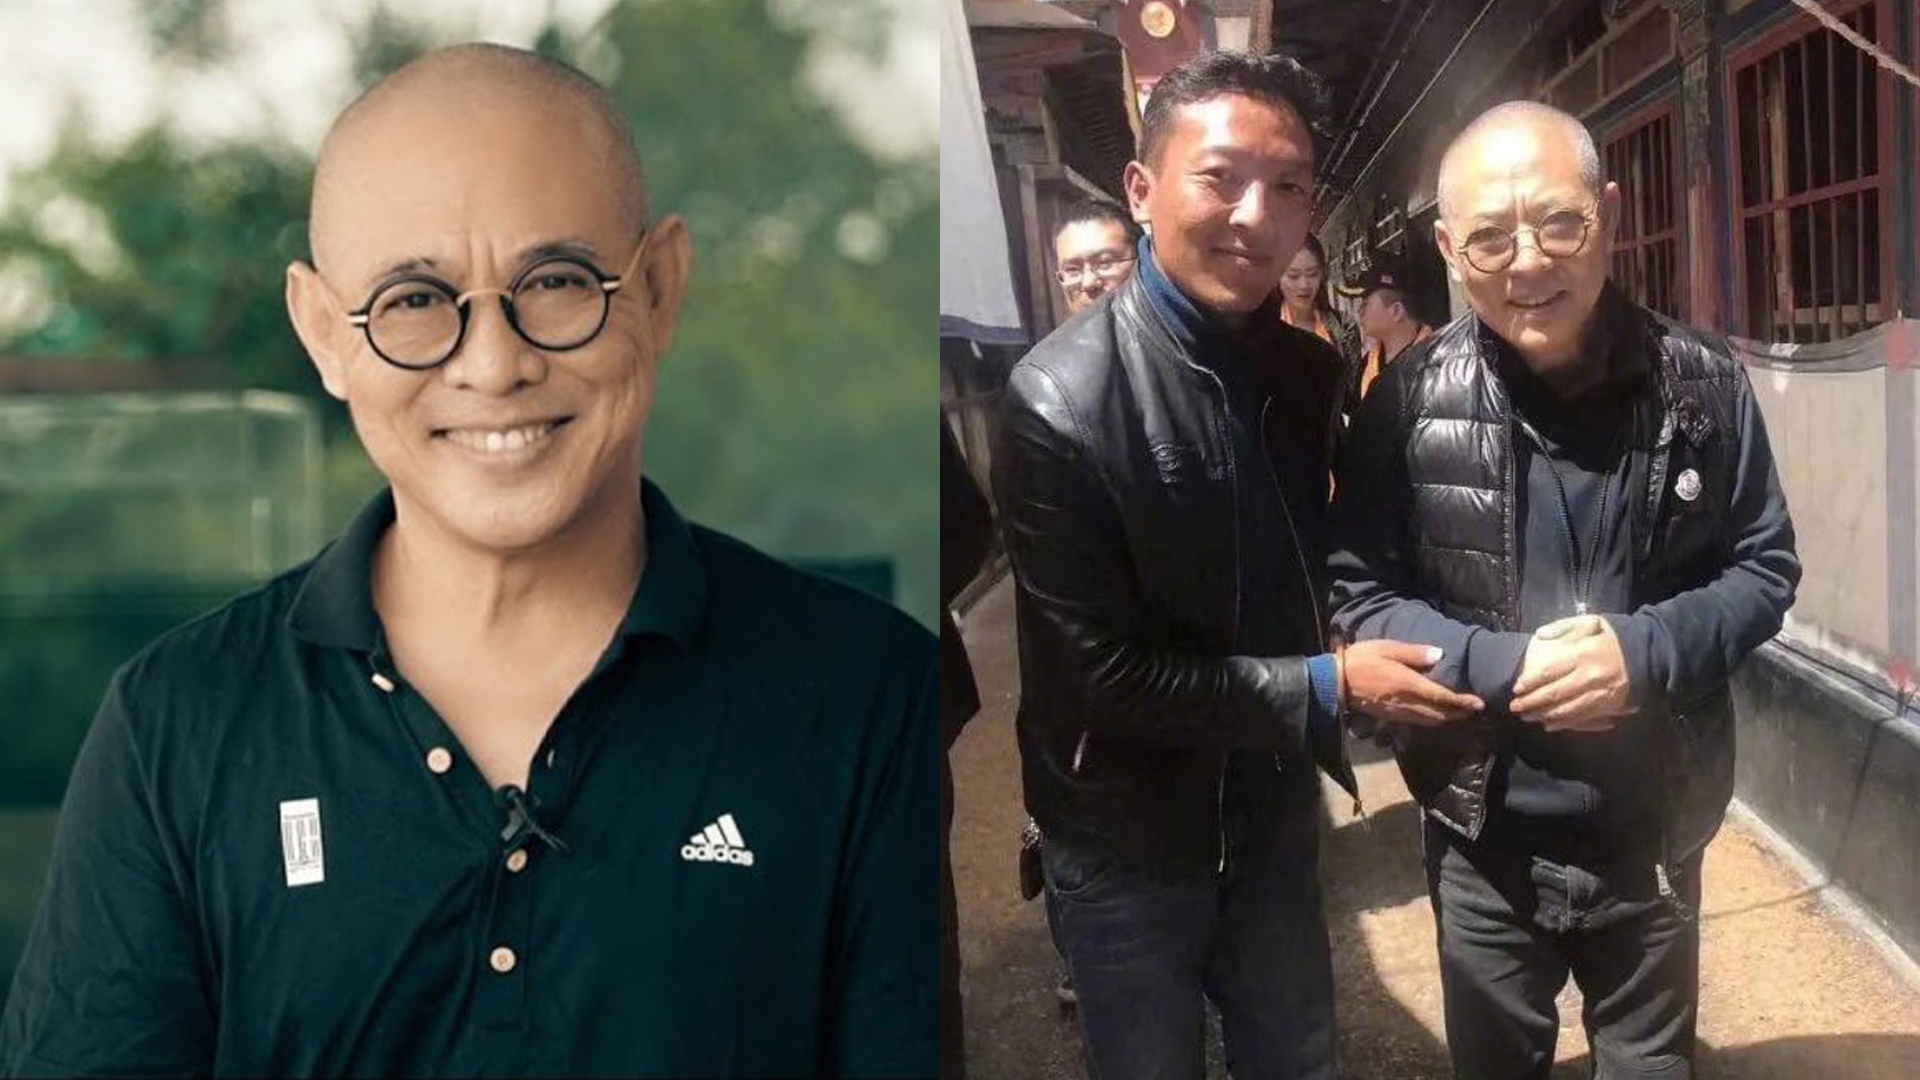 Here's How Jet Li Responded To Shocking Photos Of Him Looking Old